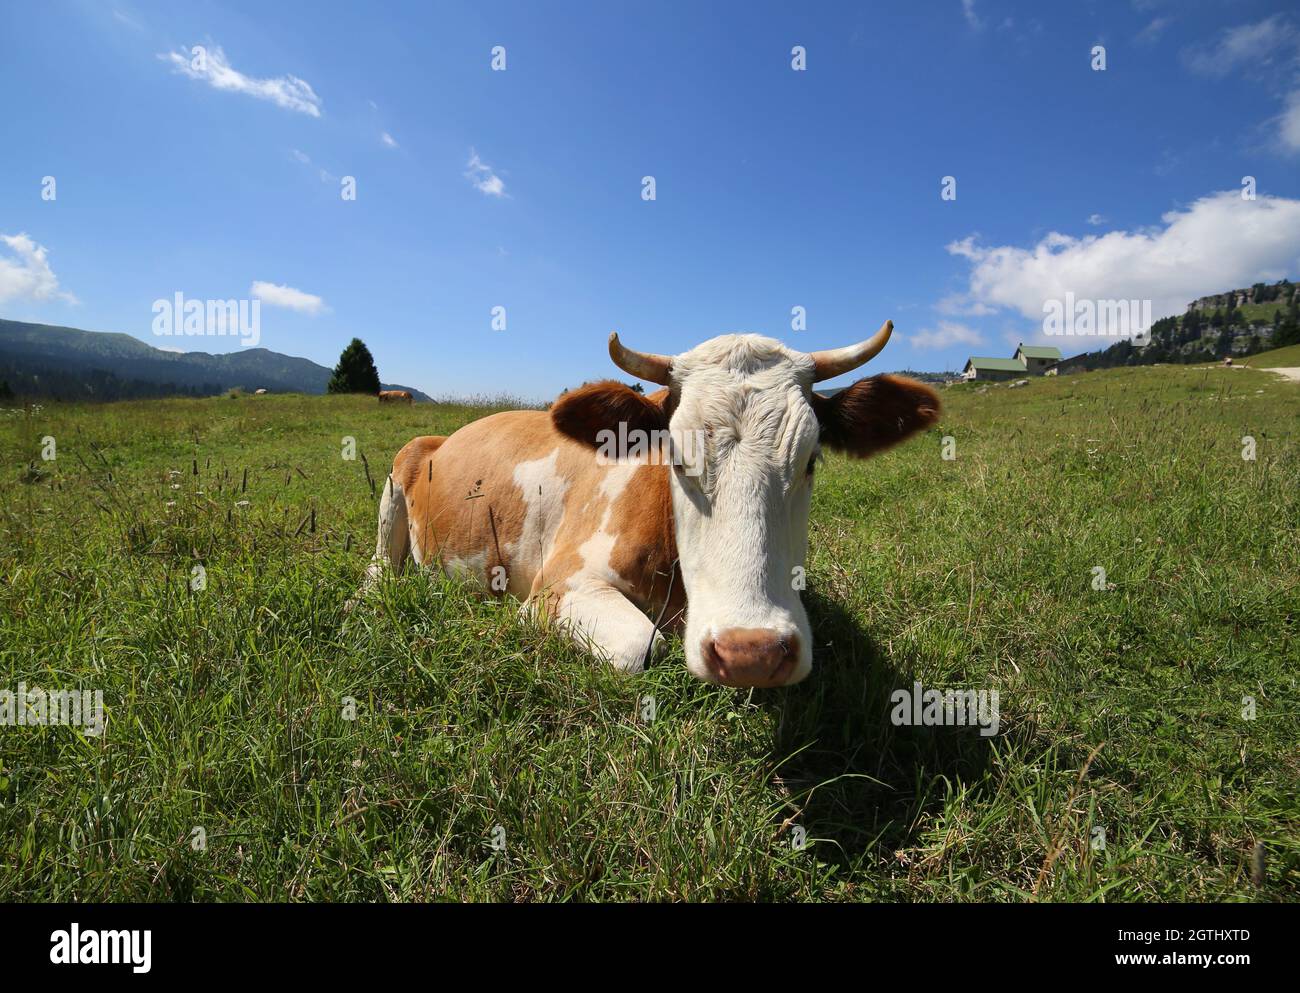 Cow In A Field In Mountains Looks At Camera Stock Photo